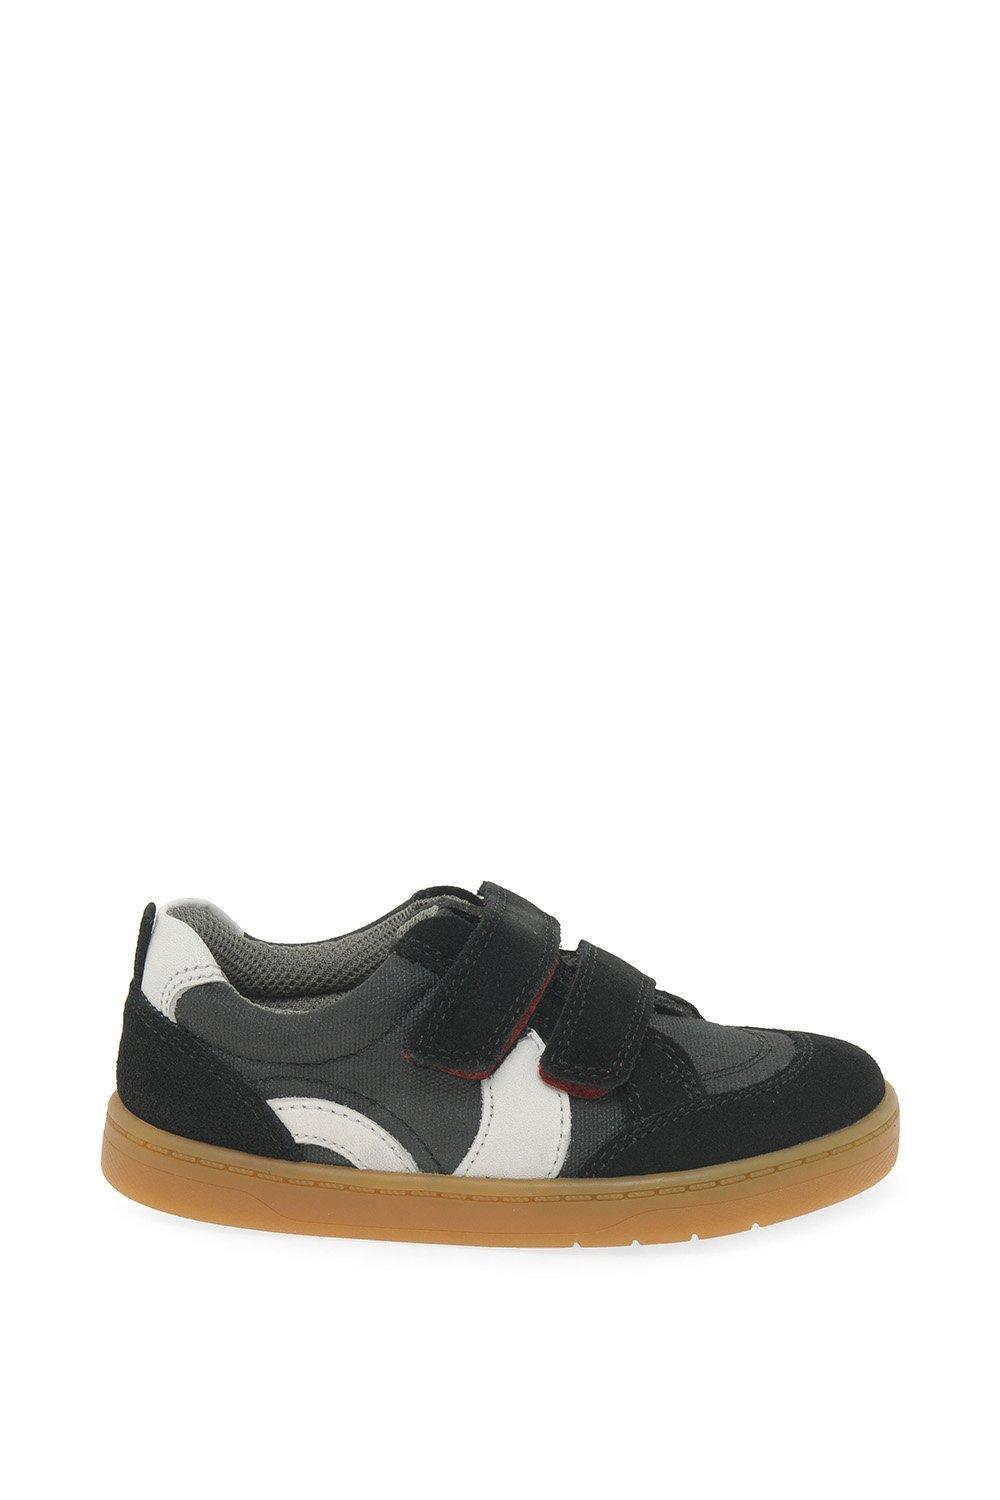 ’Enigma’ Infant Trainers